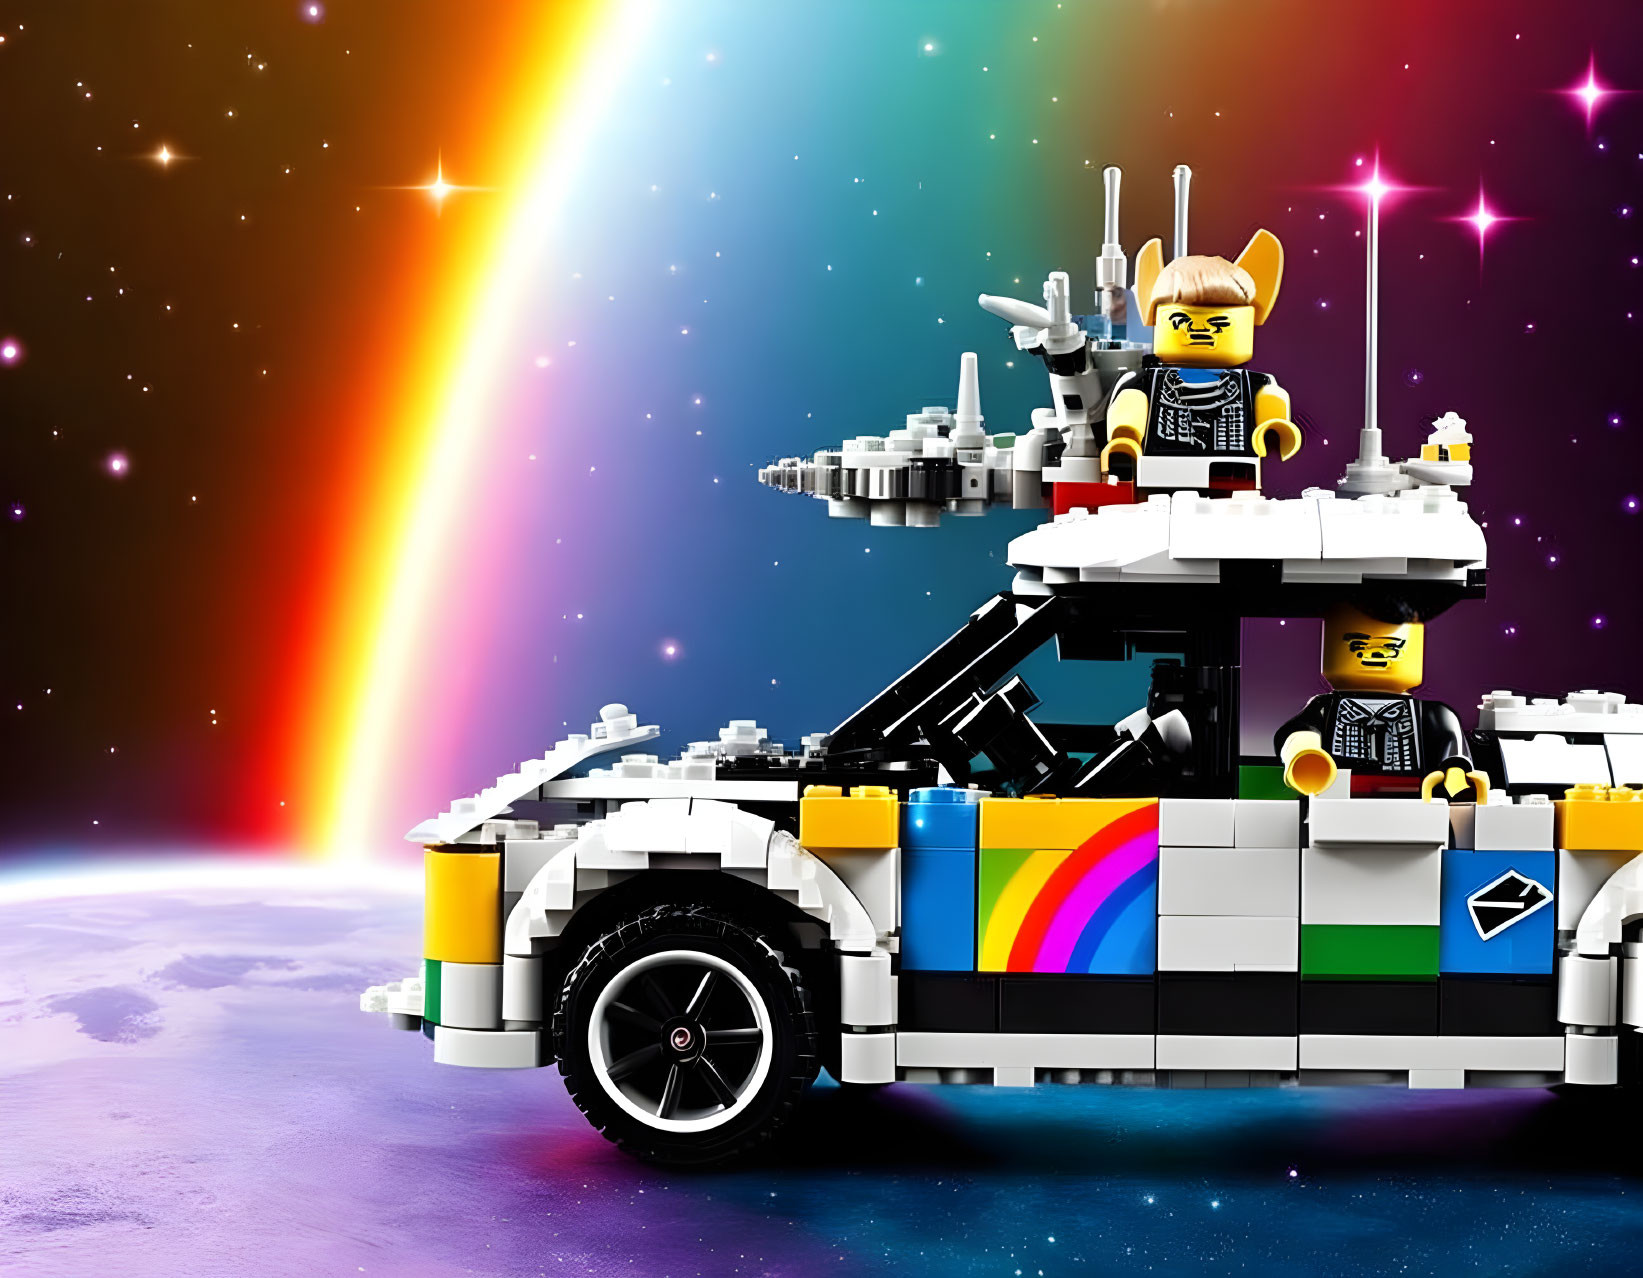 Futuristic space LEGO set with car, minifigures, and cosmic backdrop